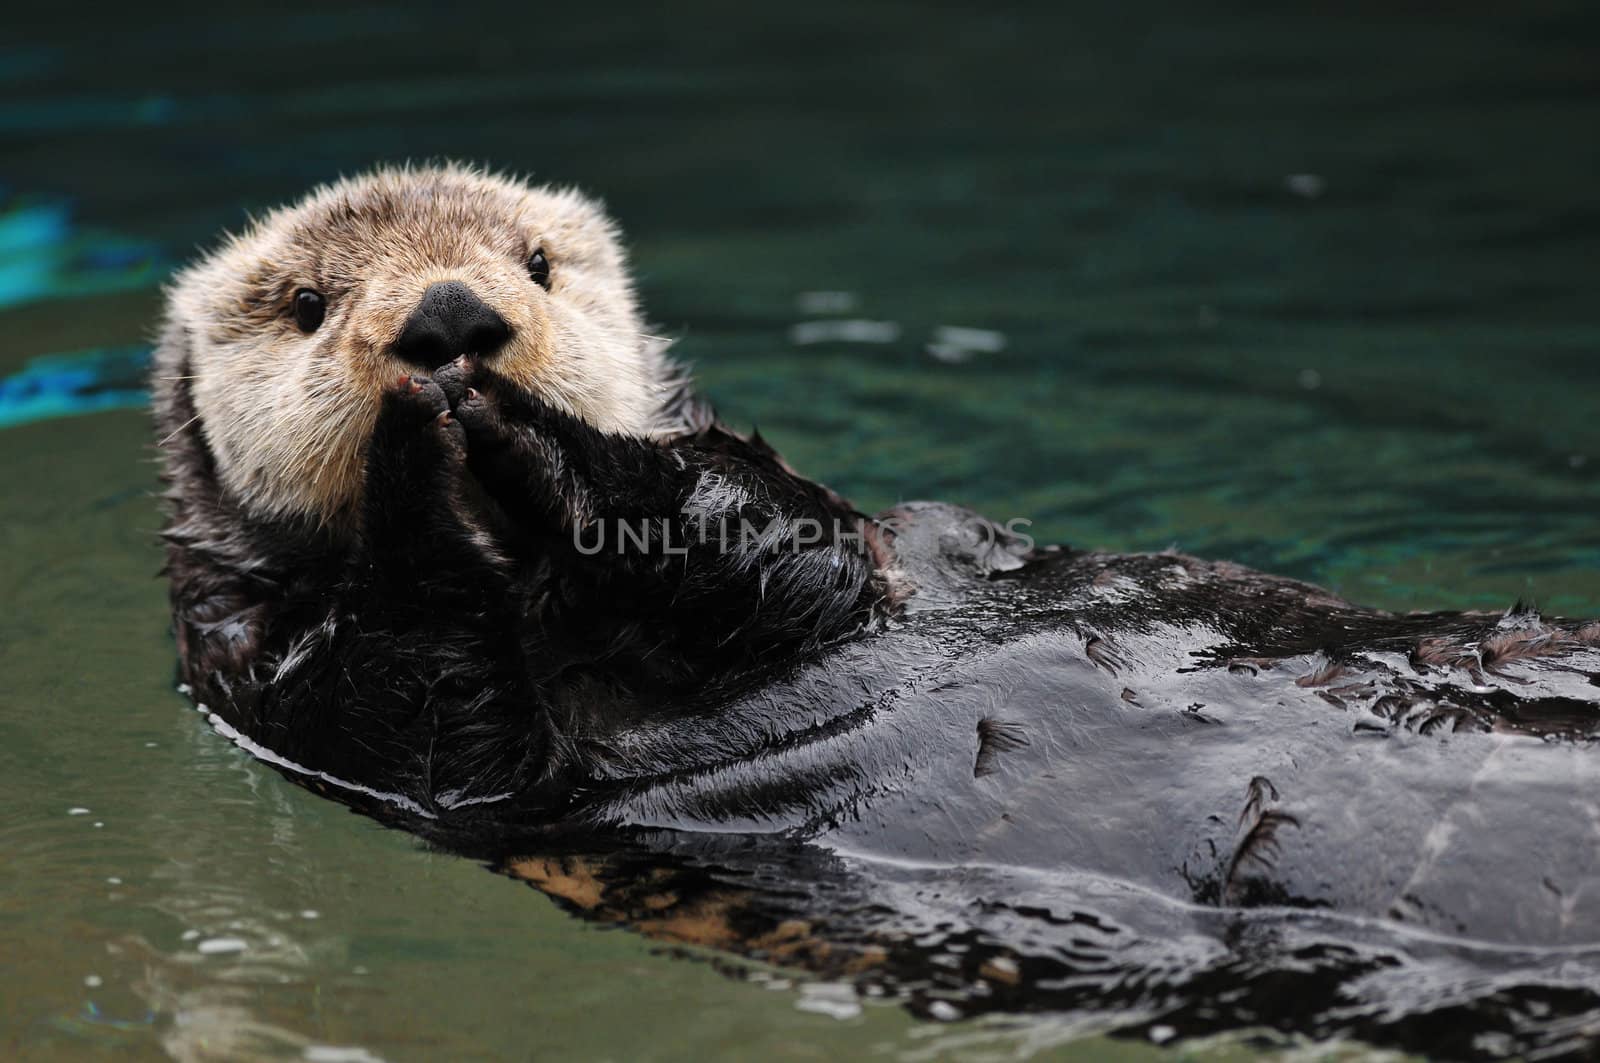 Cute otter greets visitors in traditional asian style with both hands together